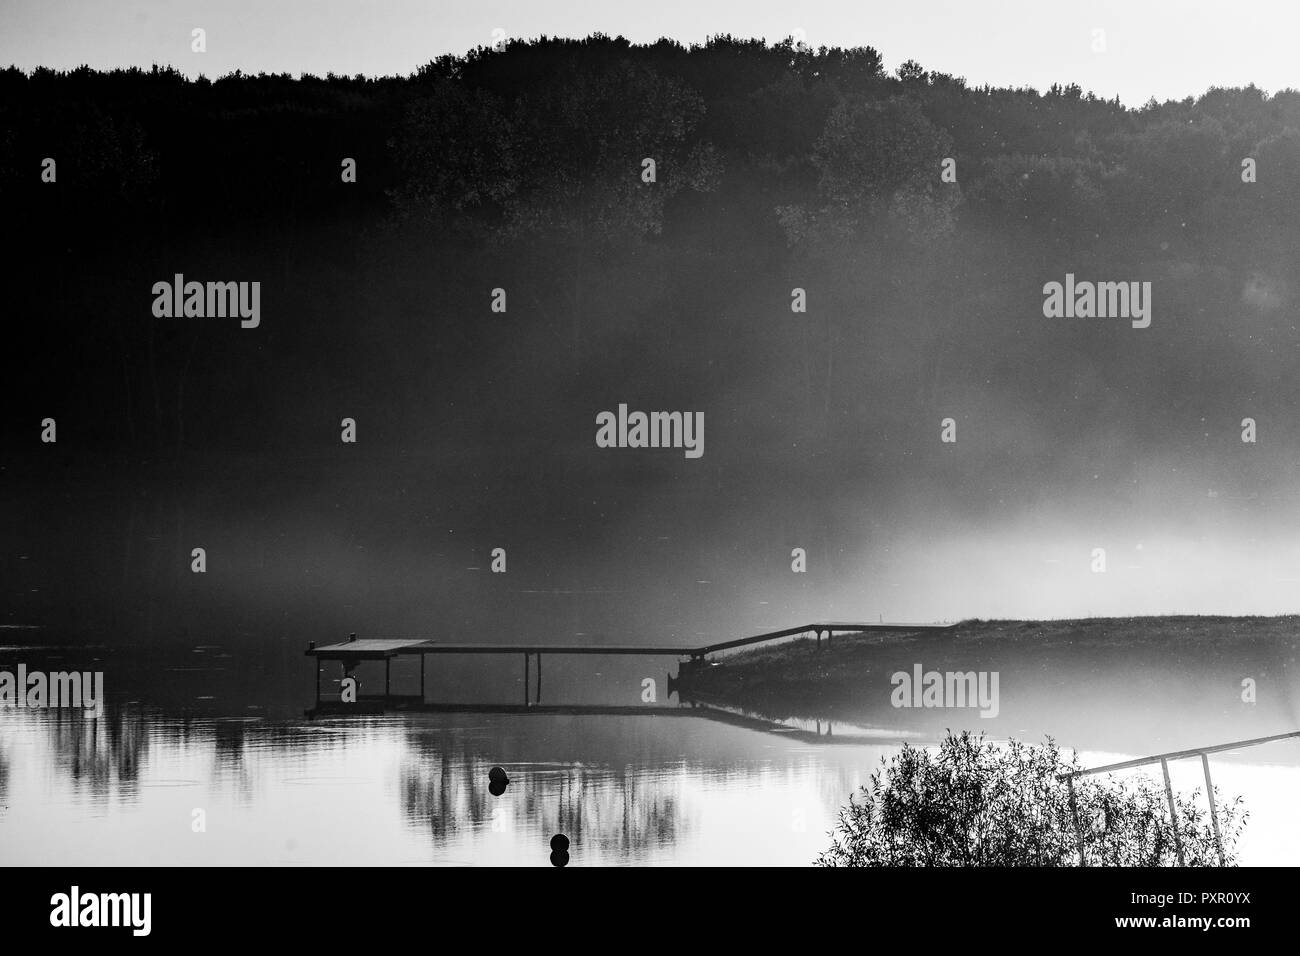 the pier on the lake. sunset, fog on the lake Stock Photo